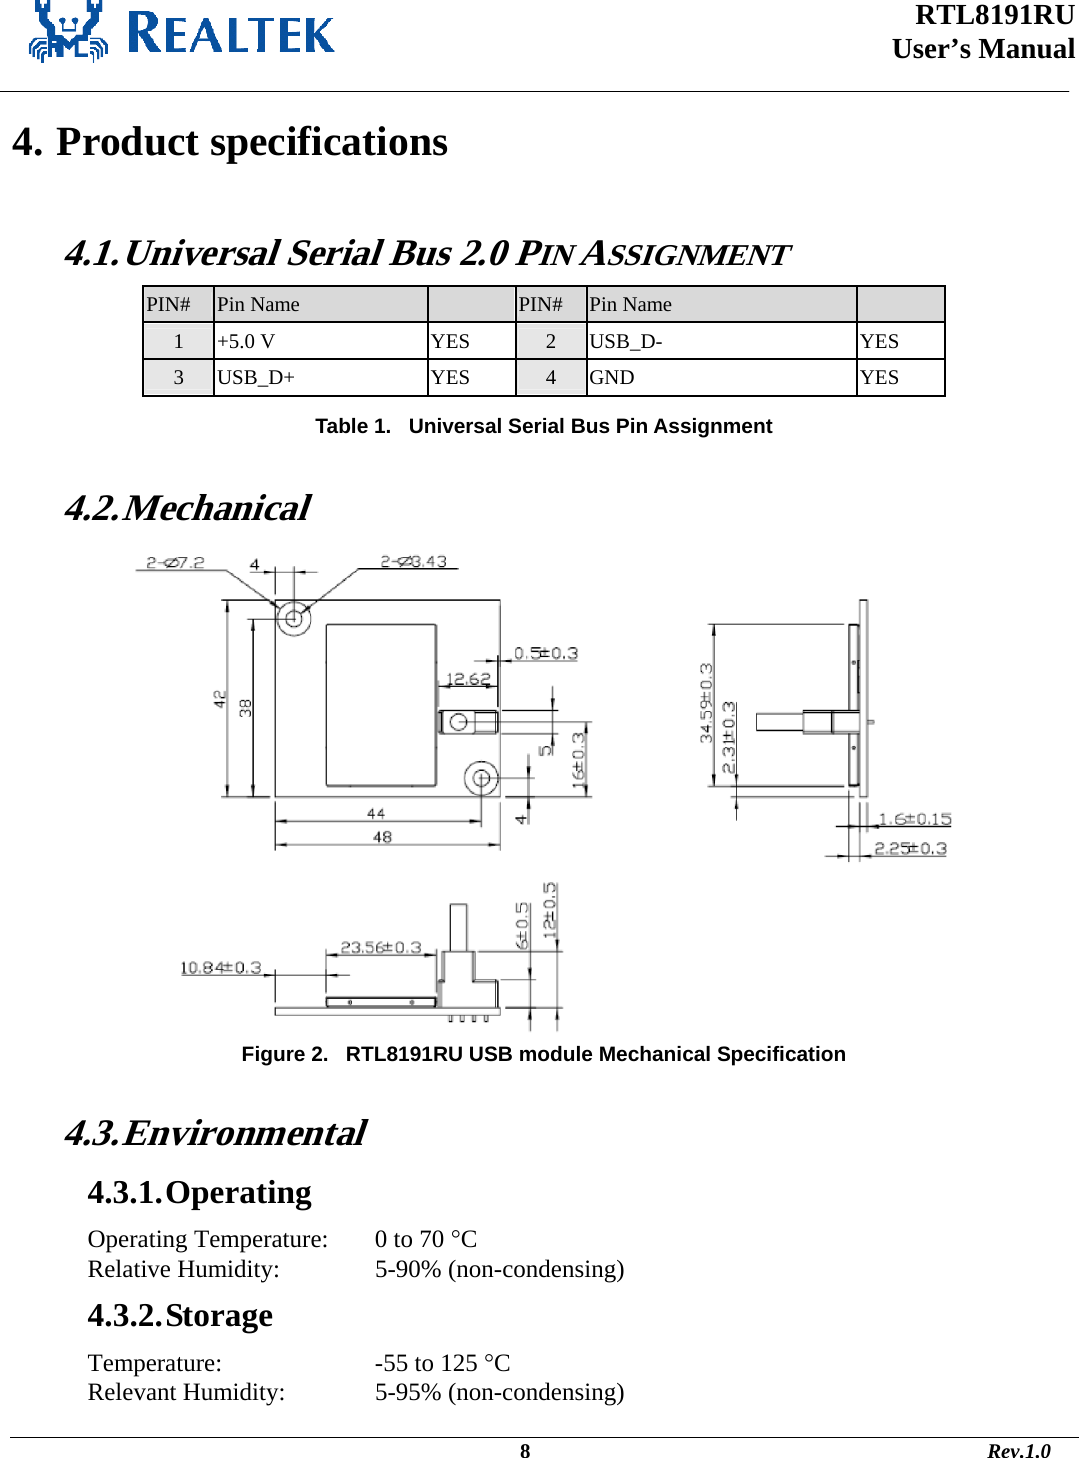  RTL8191RU  User’s Manual    4. Product specifications  4.1. Universal Serial Bus 2.0 PIN ASSIGNMENT  PIN# Pin Name    PIN# Pin Name   1 +5.0 V YES 2 USB_D- YES 3 USB_D+ YES 4 GND YES     Table 1.   Universal Serial Bus Pin Assignment  4.2. Mechanical  Figure 2.   RTL8191RU USB module Mechanical Specification  4.3. Environmental 4.3.1. Operating Operating Temperature:   0 to 70 °C Relative Humidity:     5-90% (non-condensing) 4.3.2. Storage Temperature:       -55 to 125 °C  Relevant Humidity:     5-95% (non-condensing)                                                                                             8                                                                                       Rev.1.0 